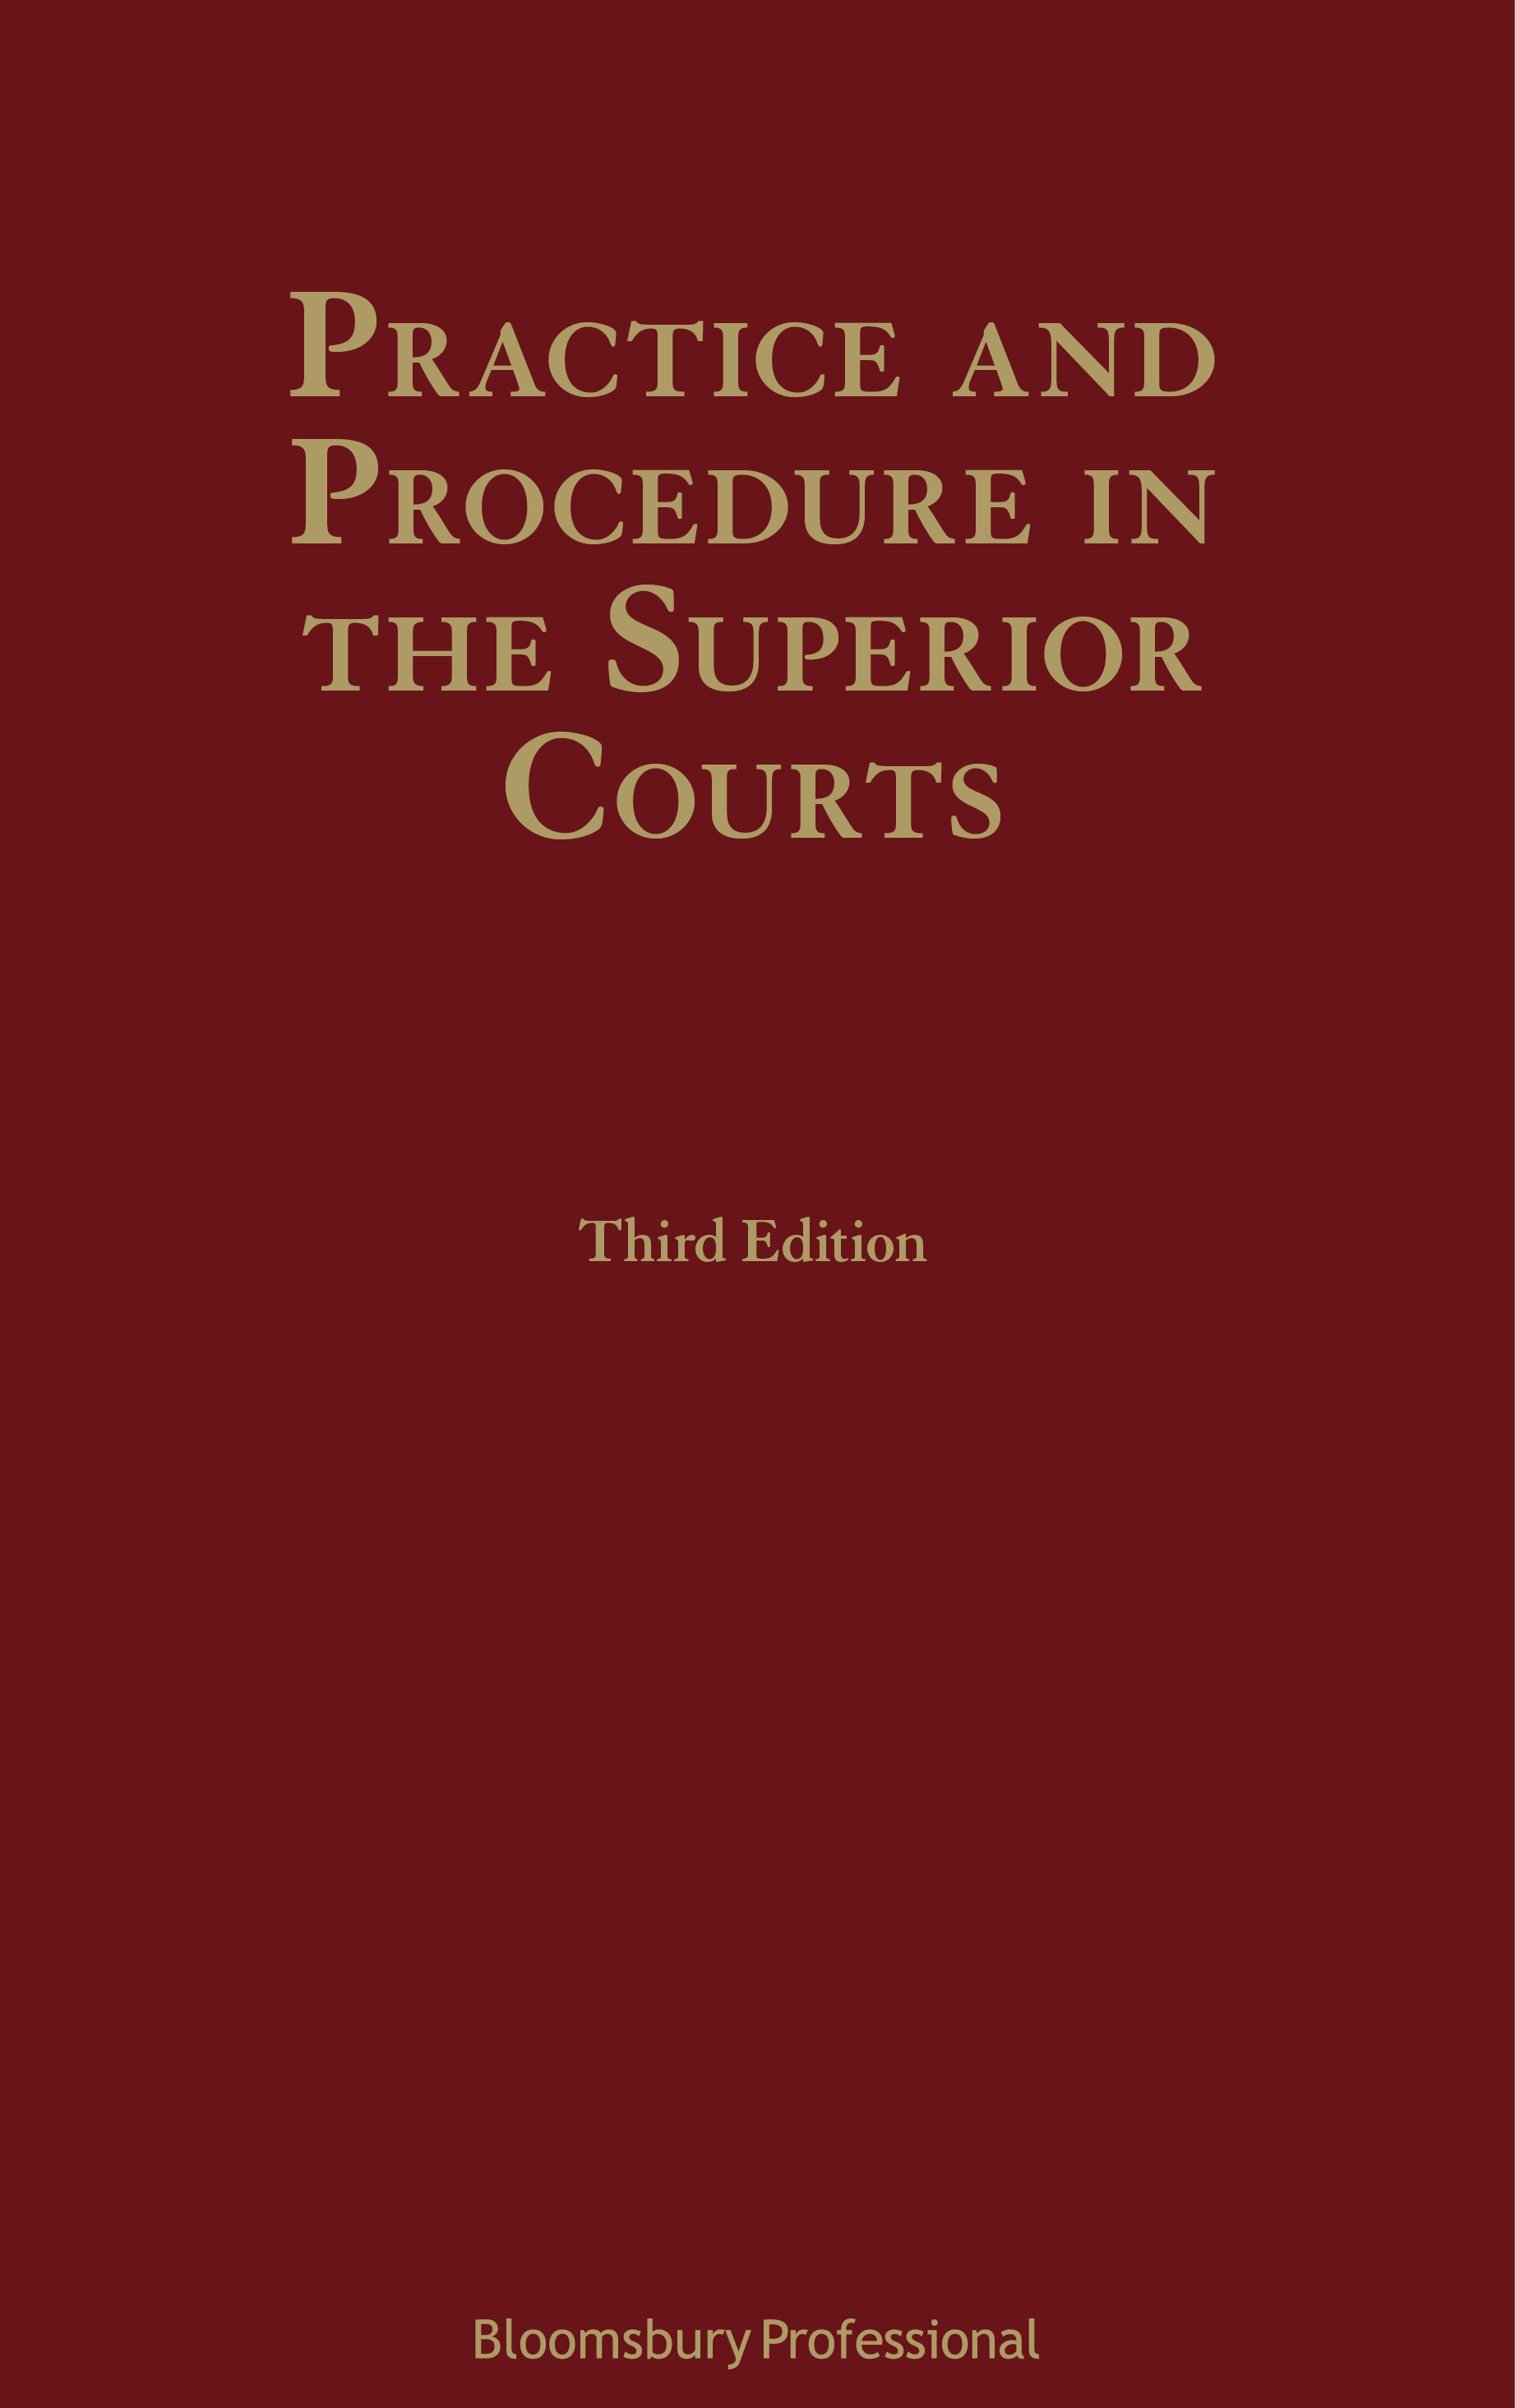 Practice and Procedure in the Superior Courts book jacket